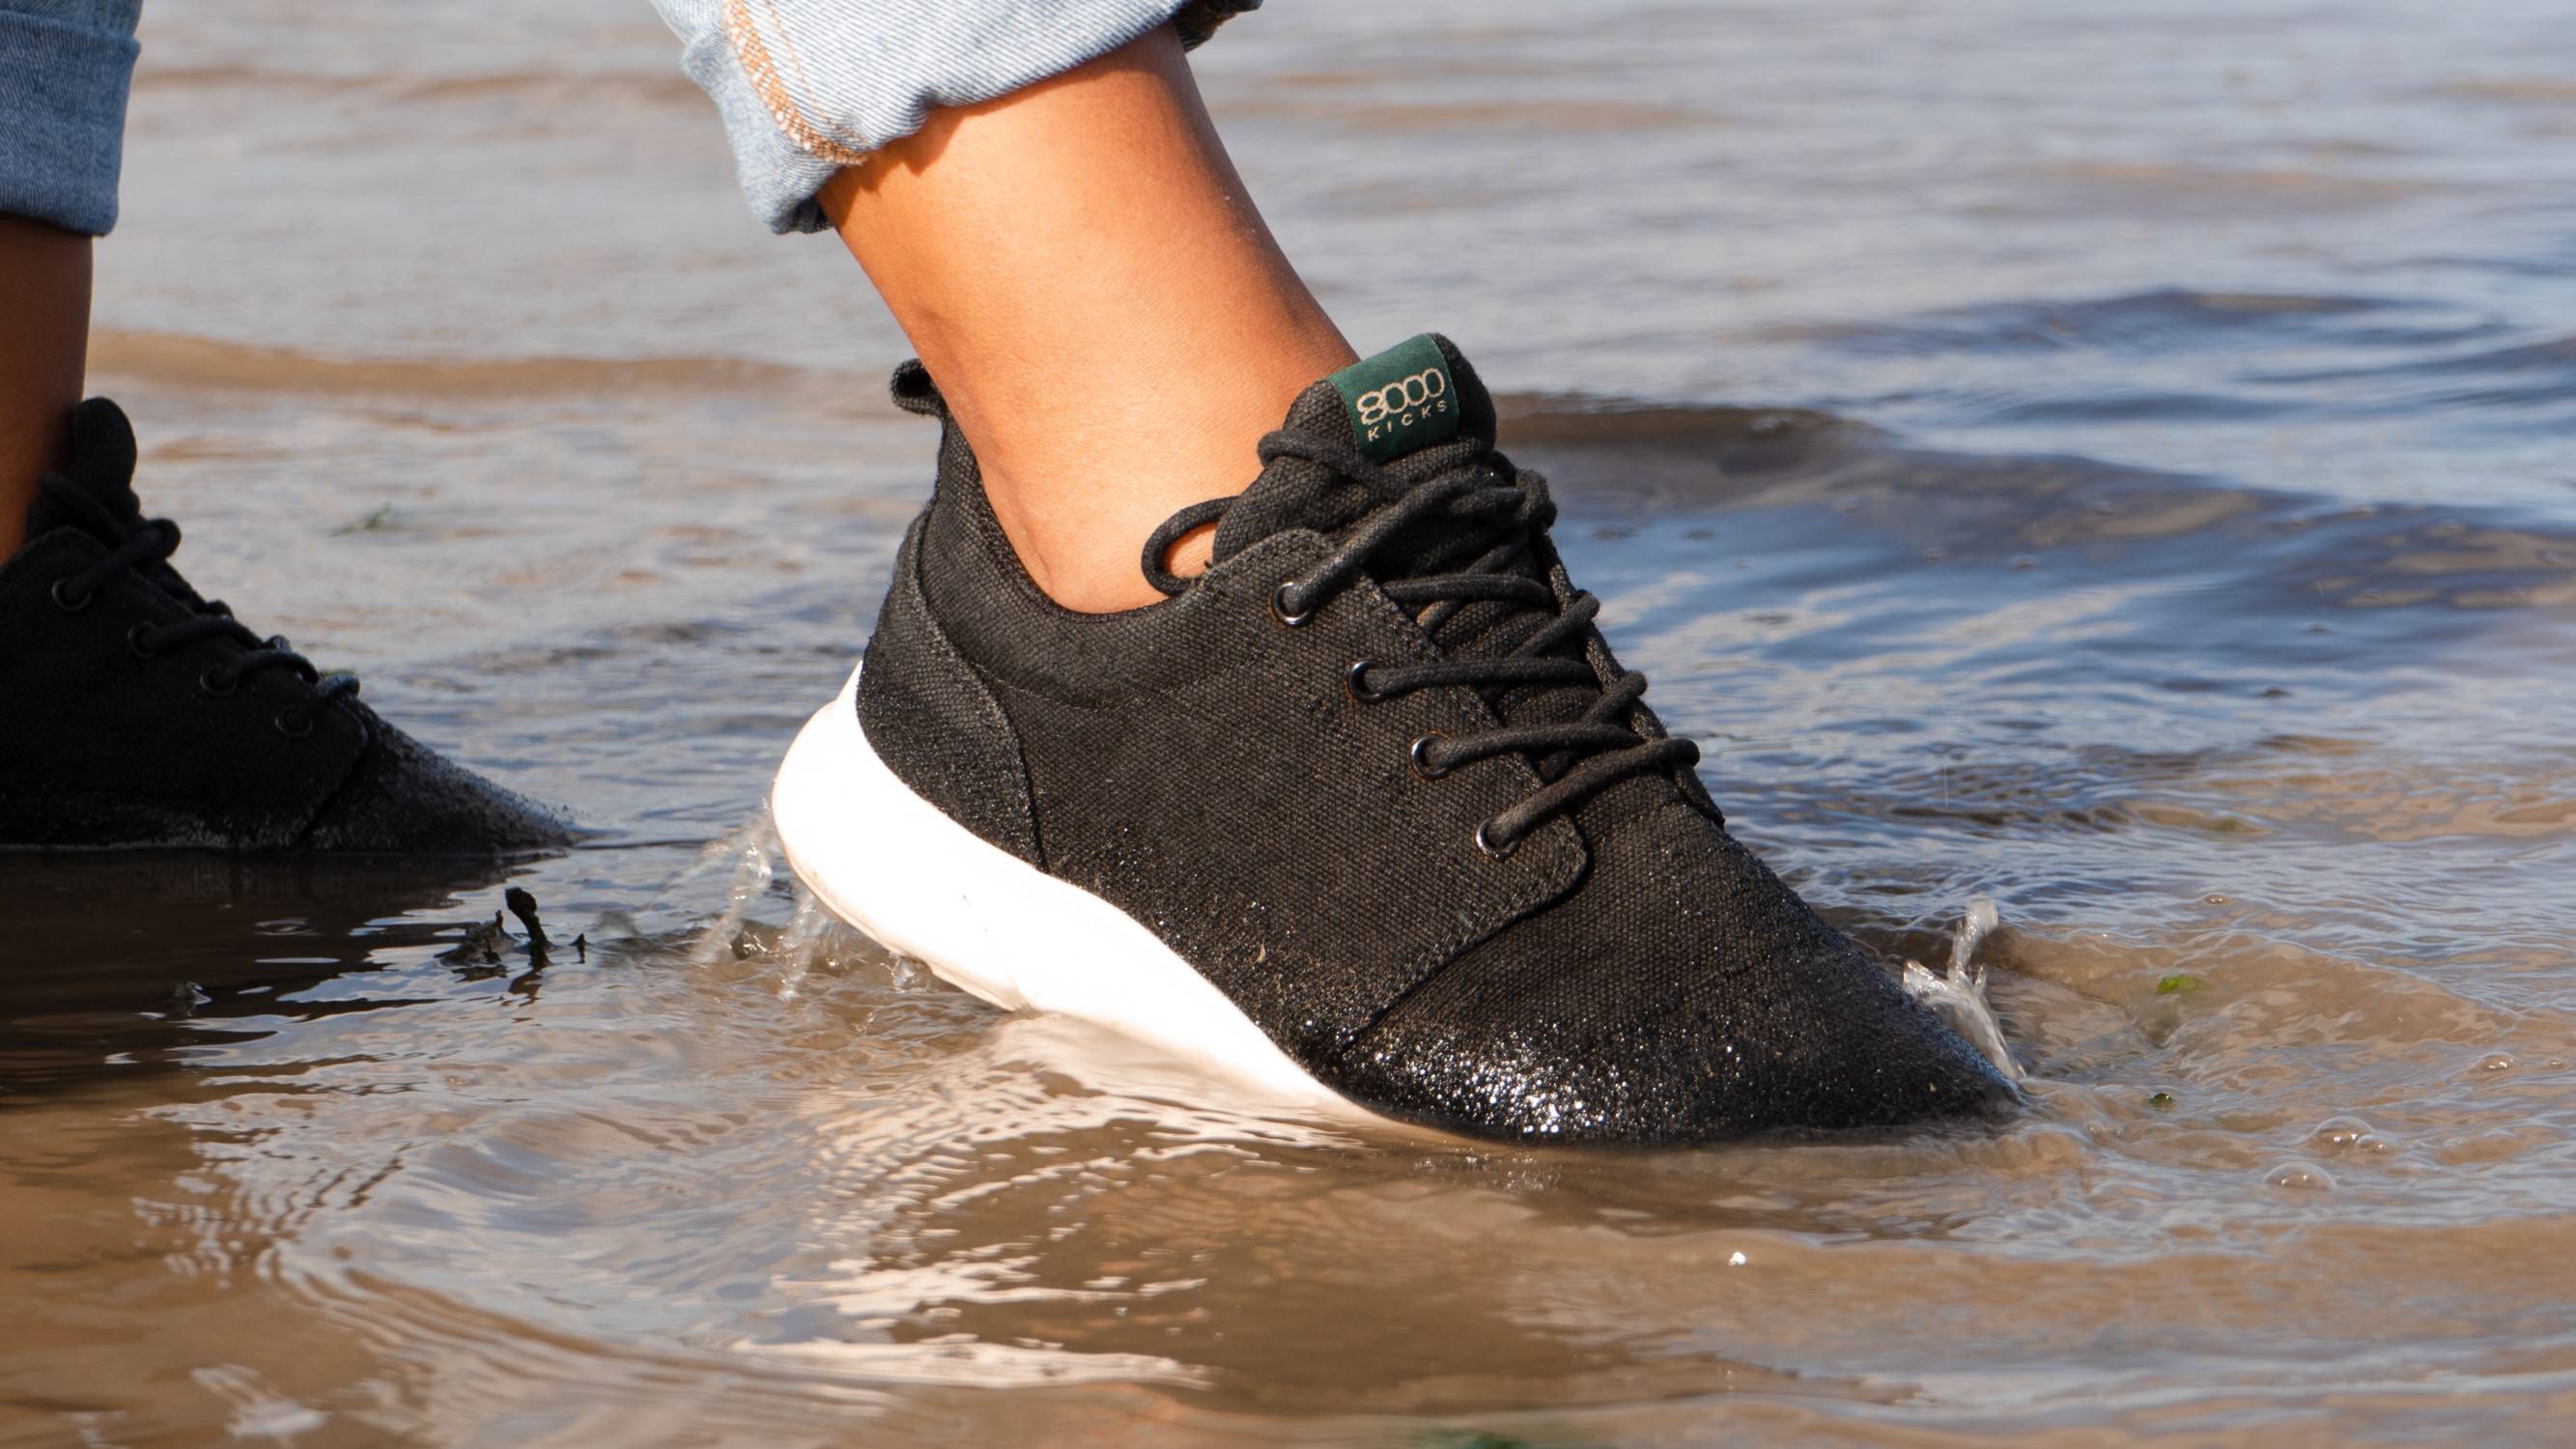 Vegan and water repellant: person standing in water with their water repellant shoes